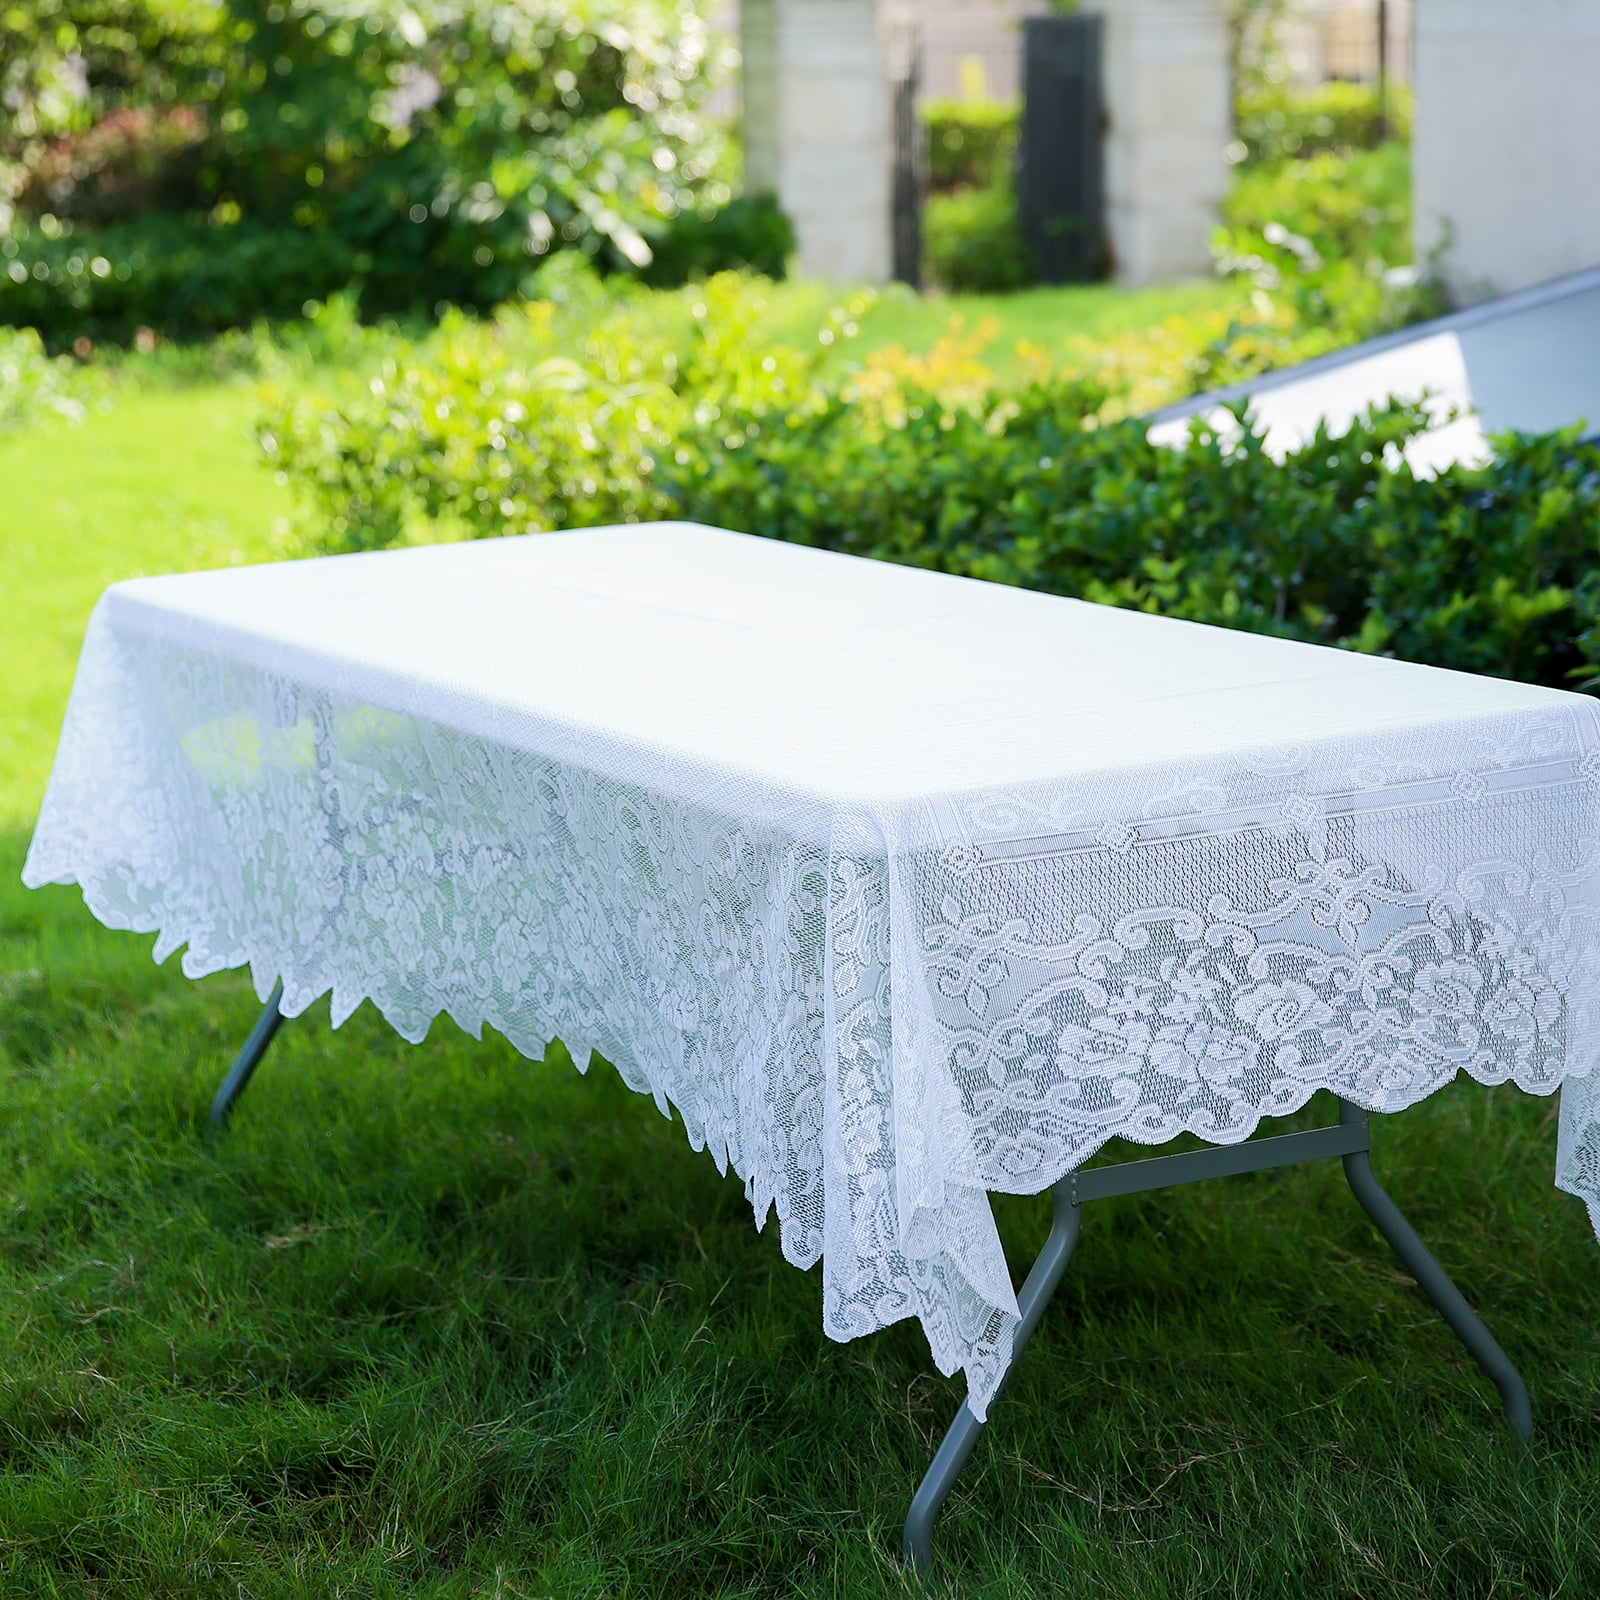 Depaga Red Baseball Lace Tablecloths 54 x 54 Inch,Washable Square Tablecloth,Table Covers for Family Dinner,Indoor or Outdoor Parties